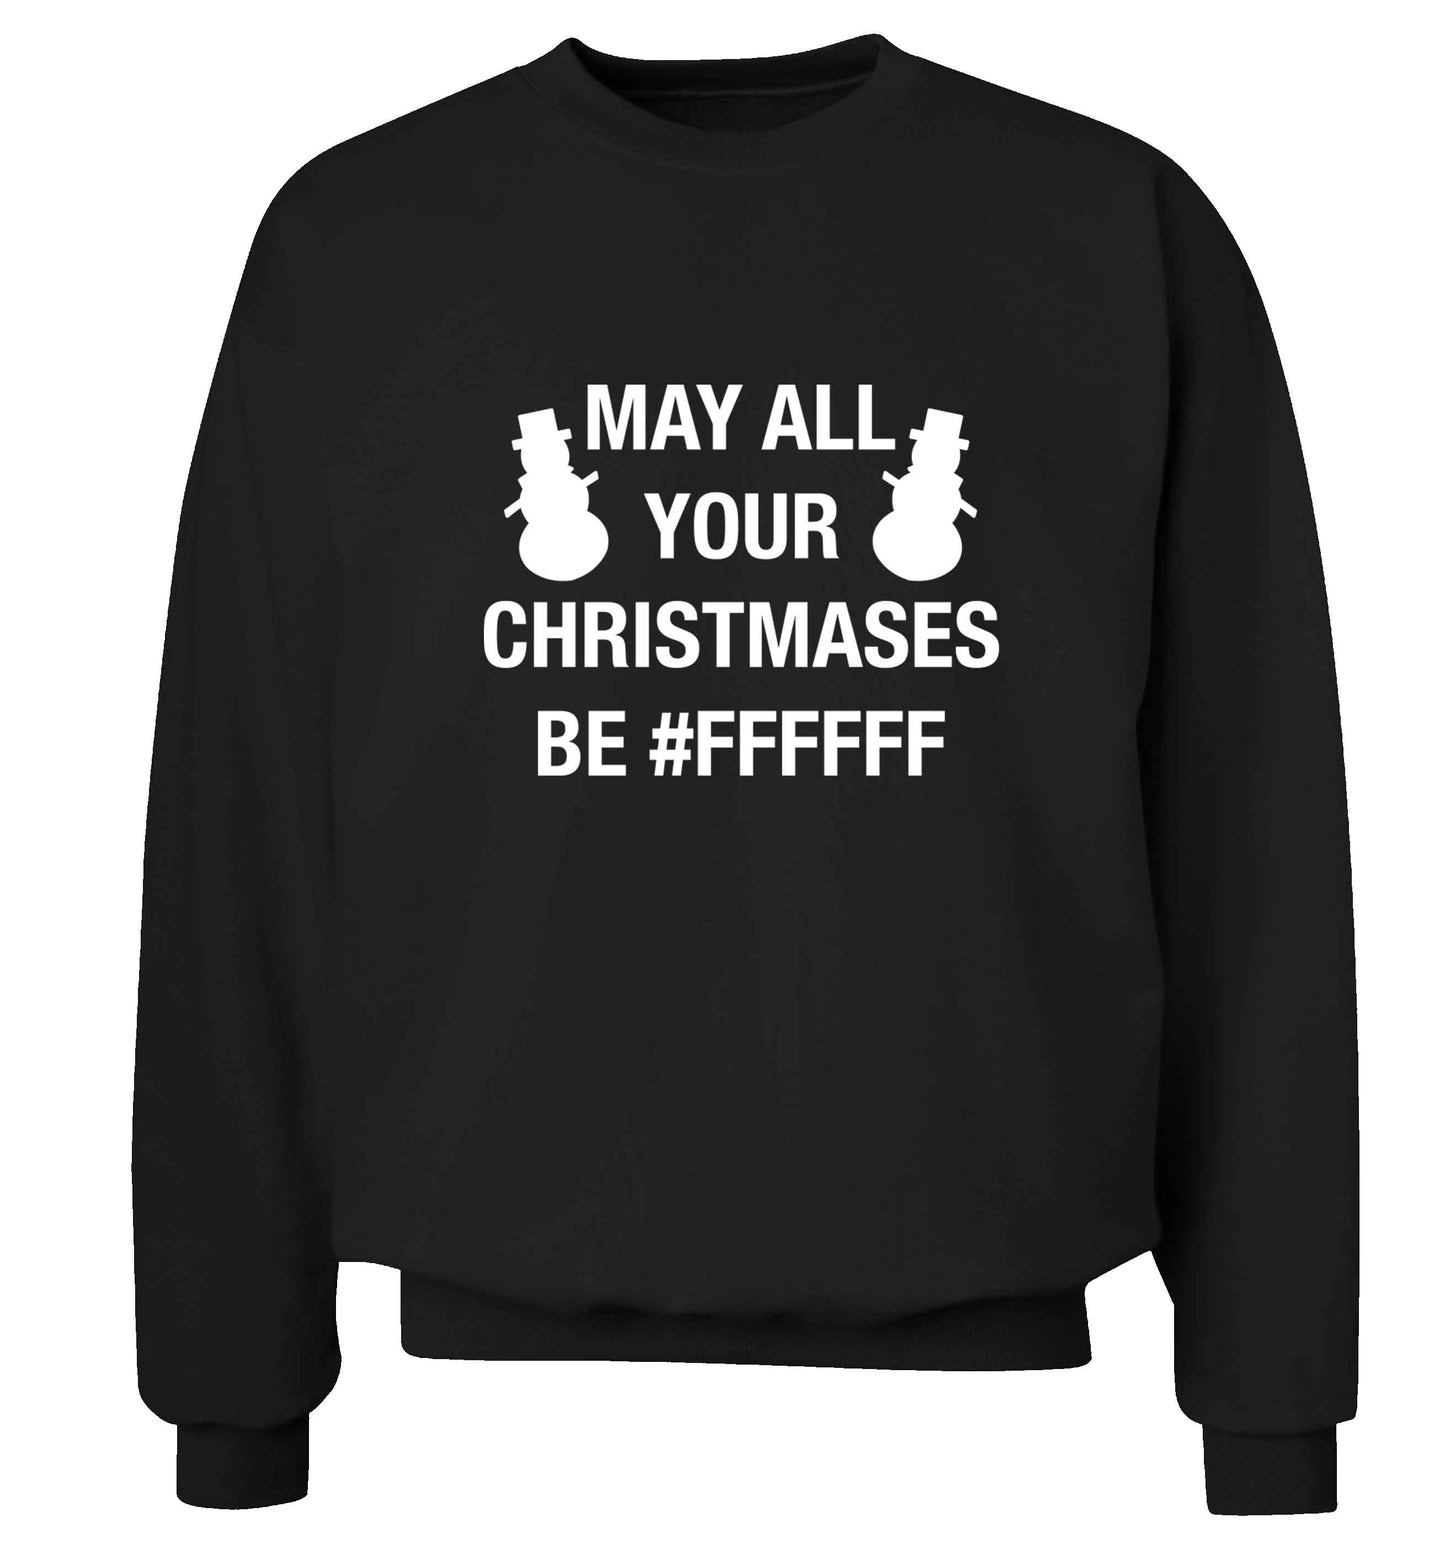 May all your Christmases be #FFFFFF adult's unisex black sweater 2XL